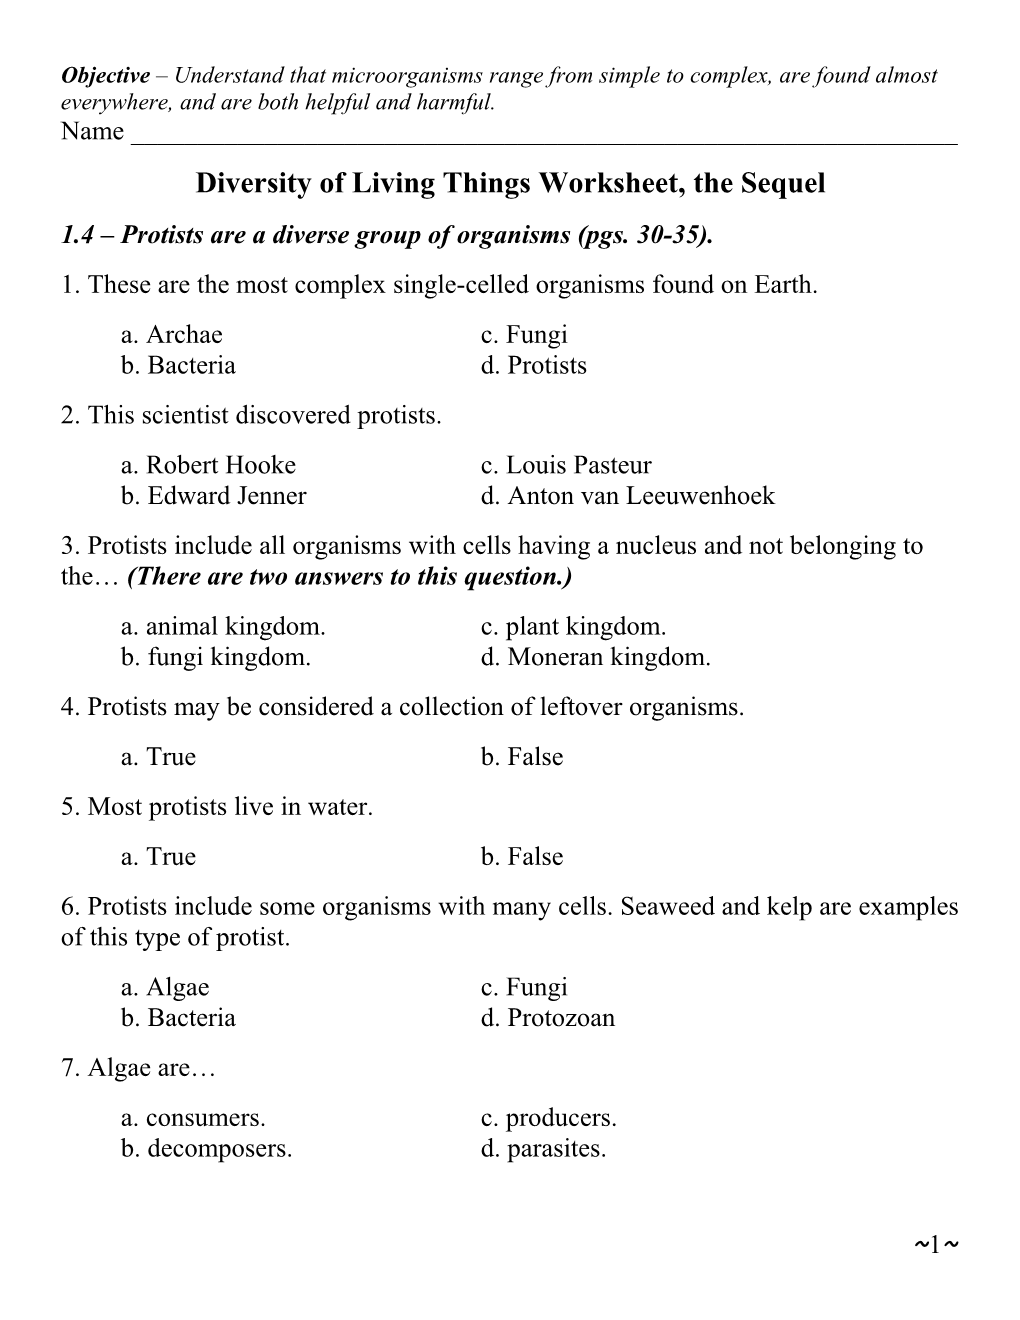 Diversity of Living Things Worksheet, the Sequel